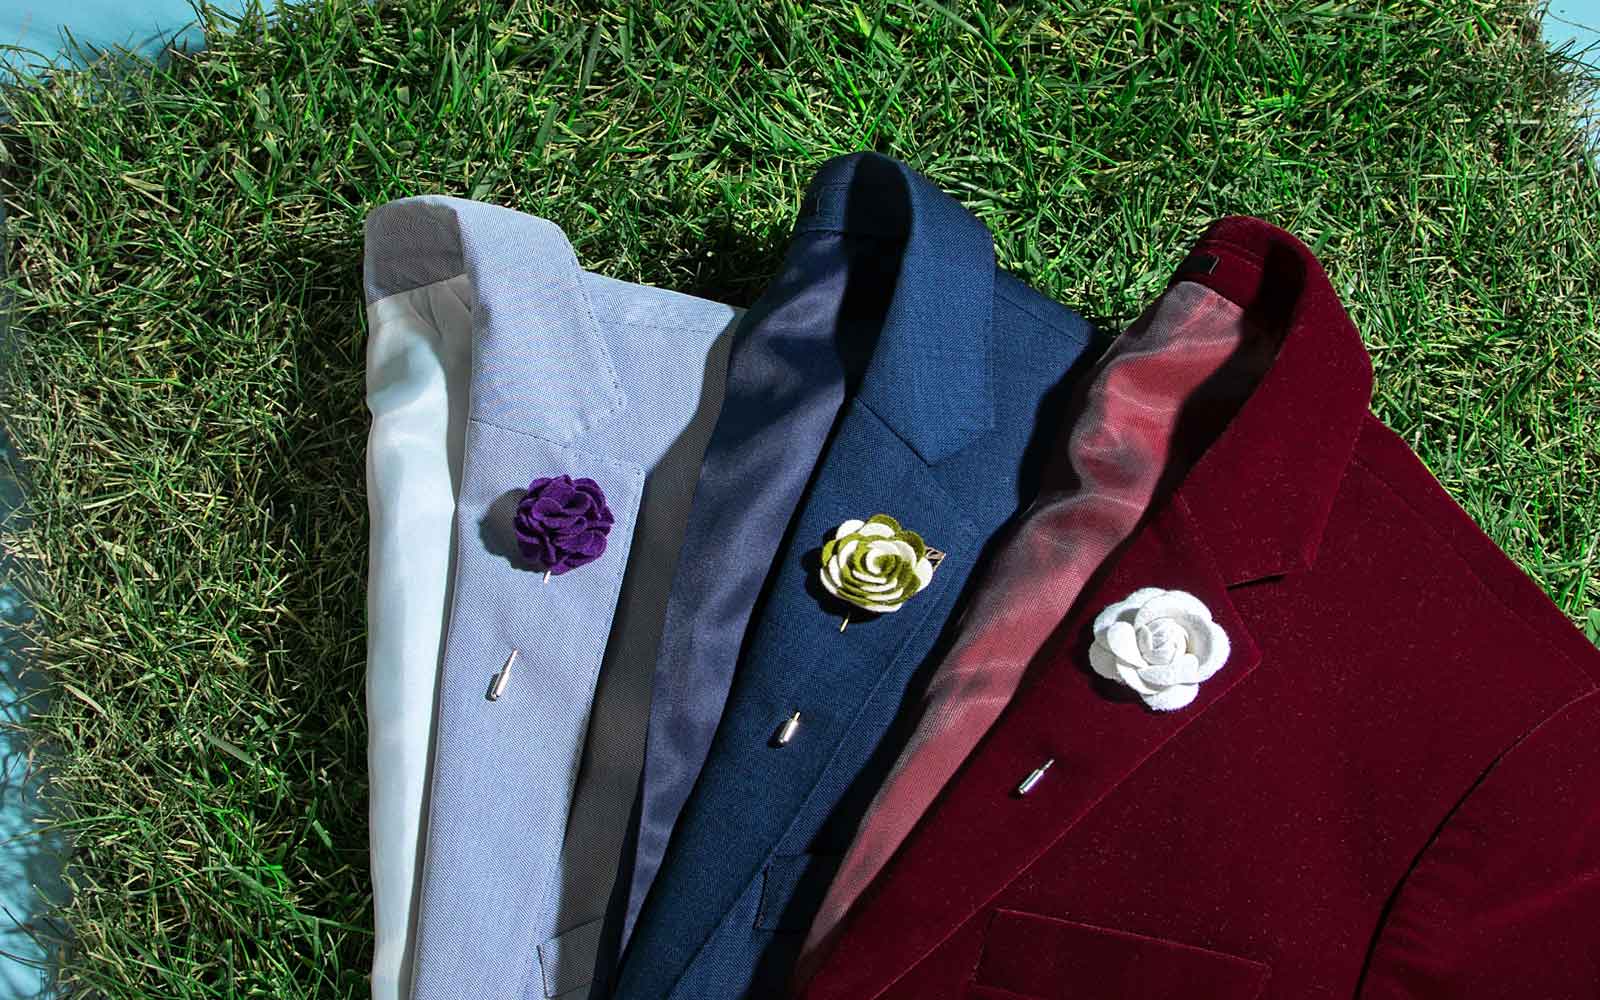 Collecting Lapel Pins - The Ultimate Guide